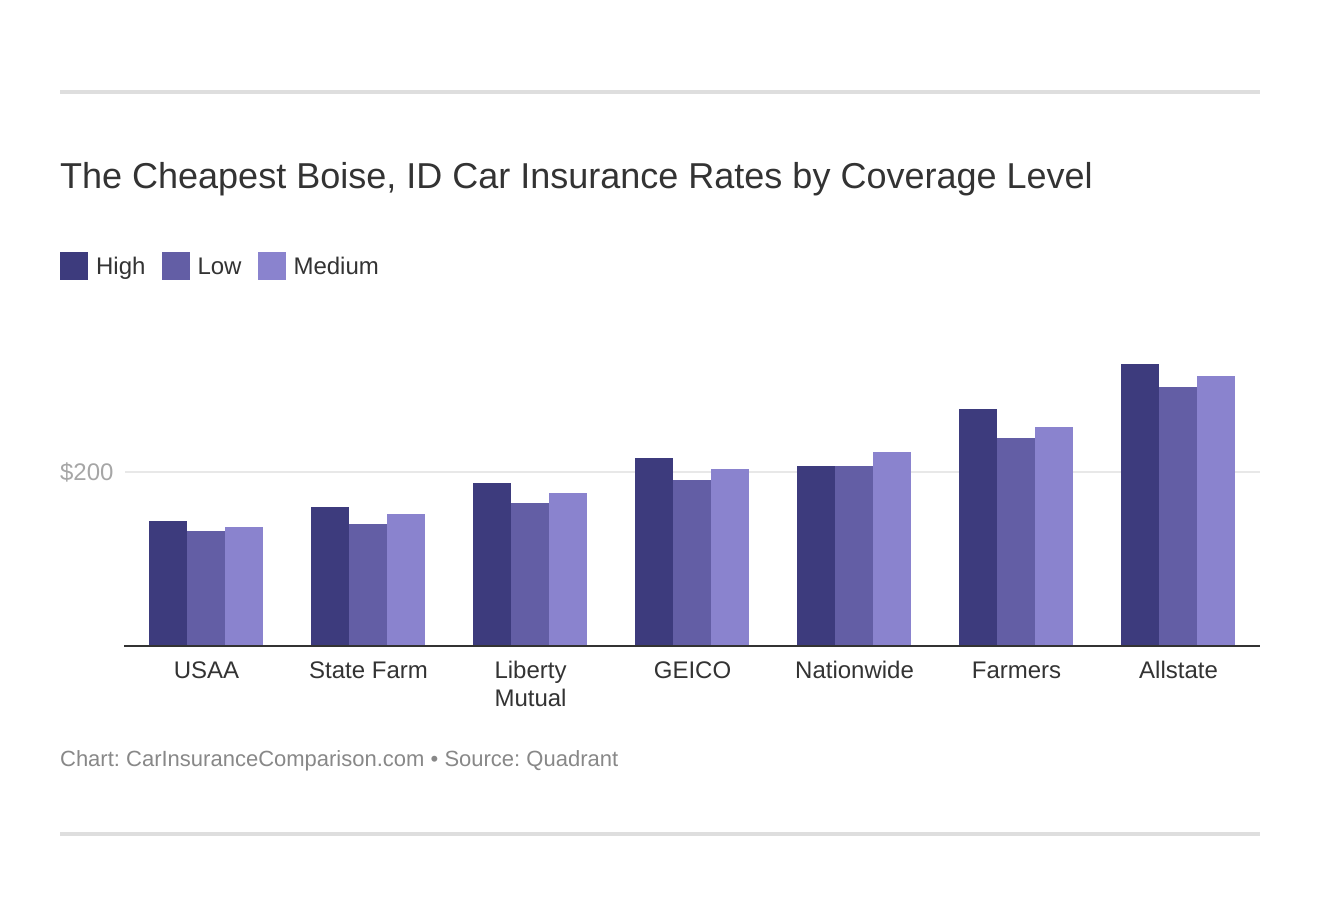 The Cheapest Boise, ID Car Insurance Rates by Coverage Level